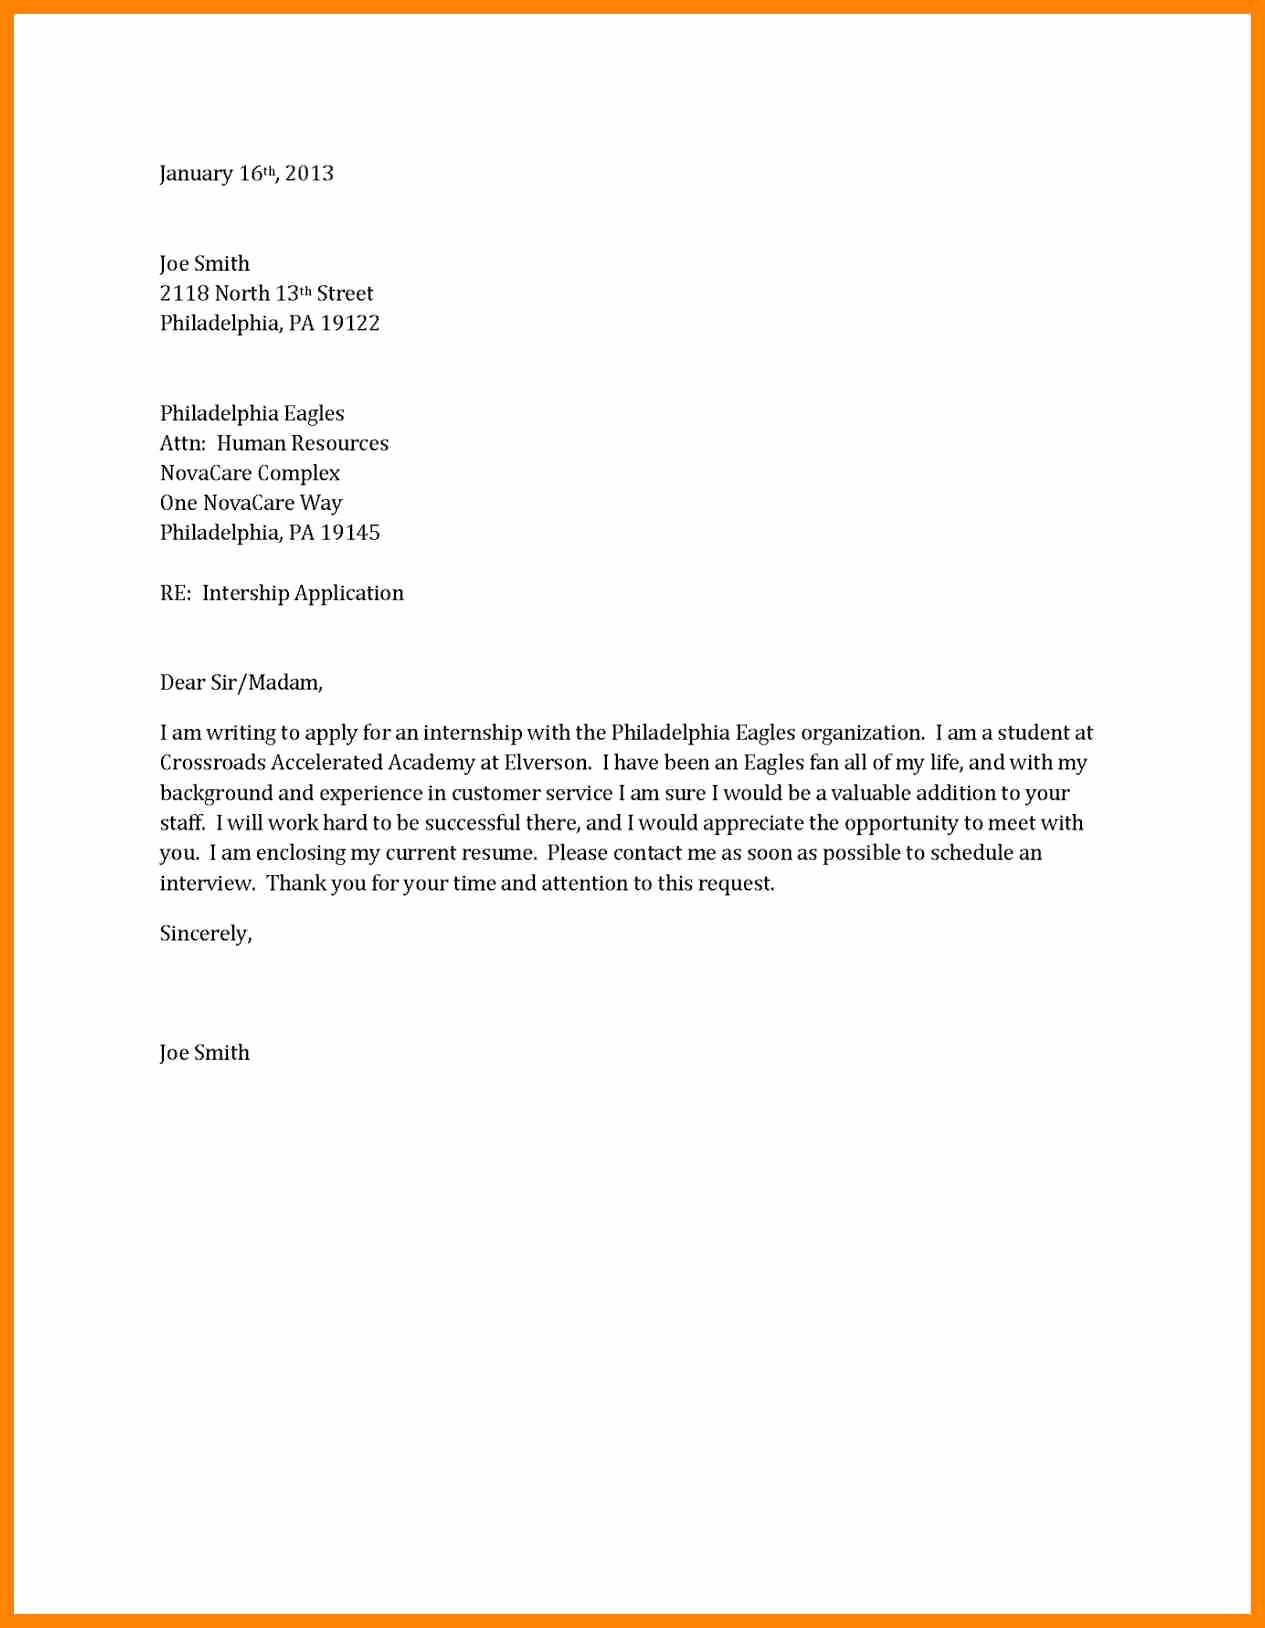 Short and Simple Cover Letters Luxury Short Cover Letters Examples